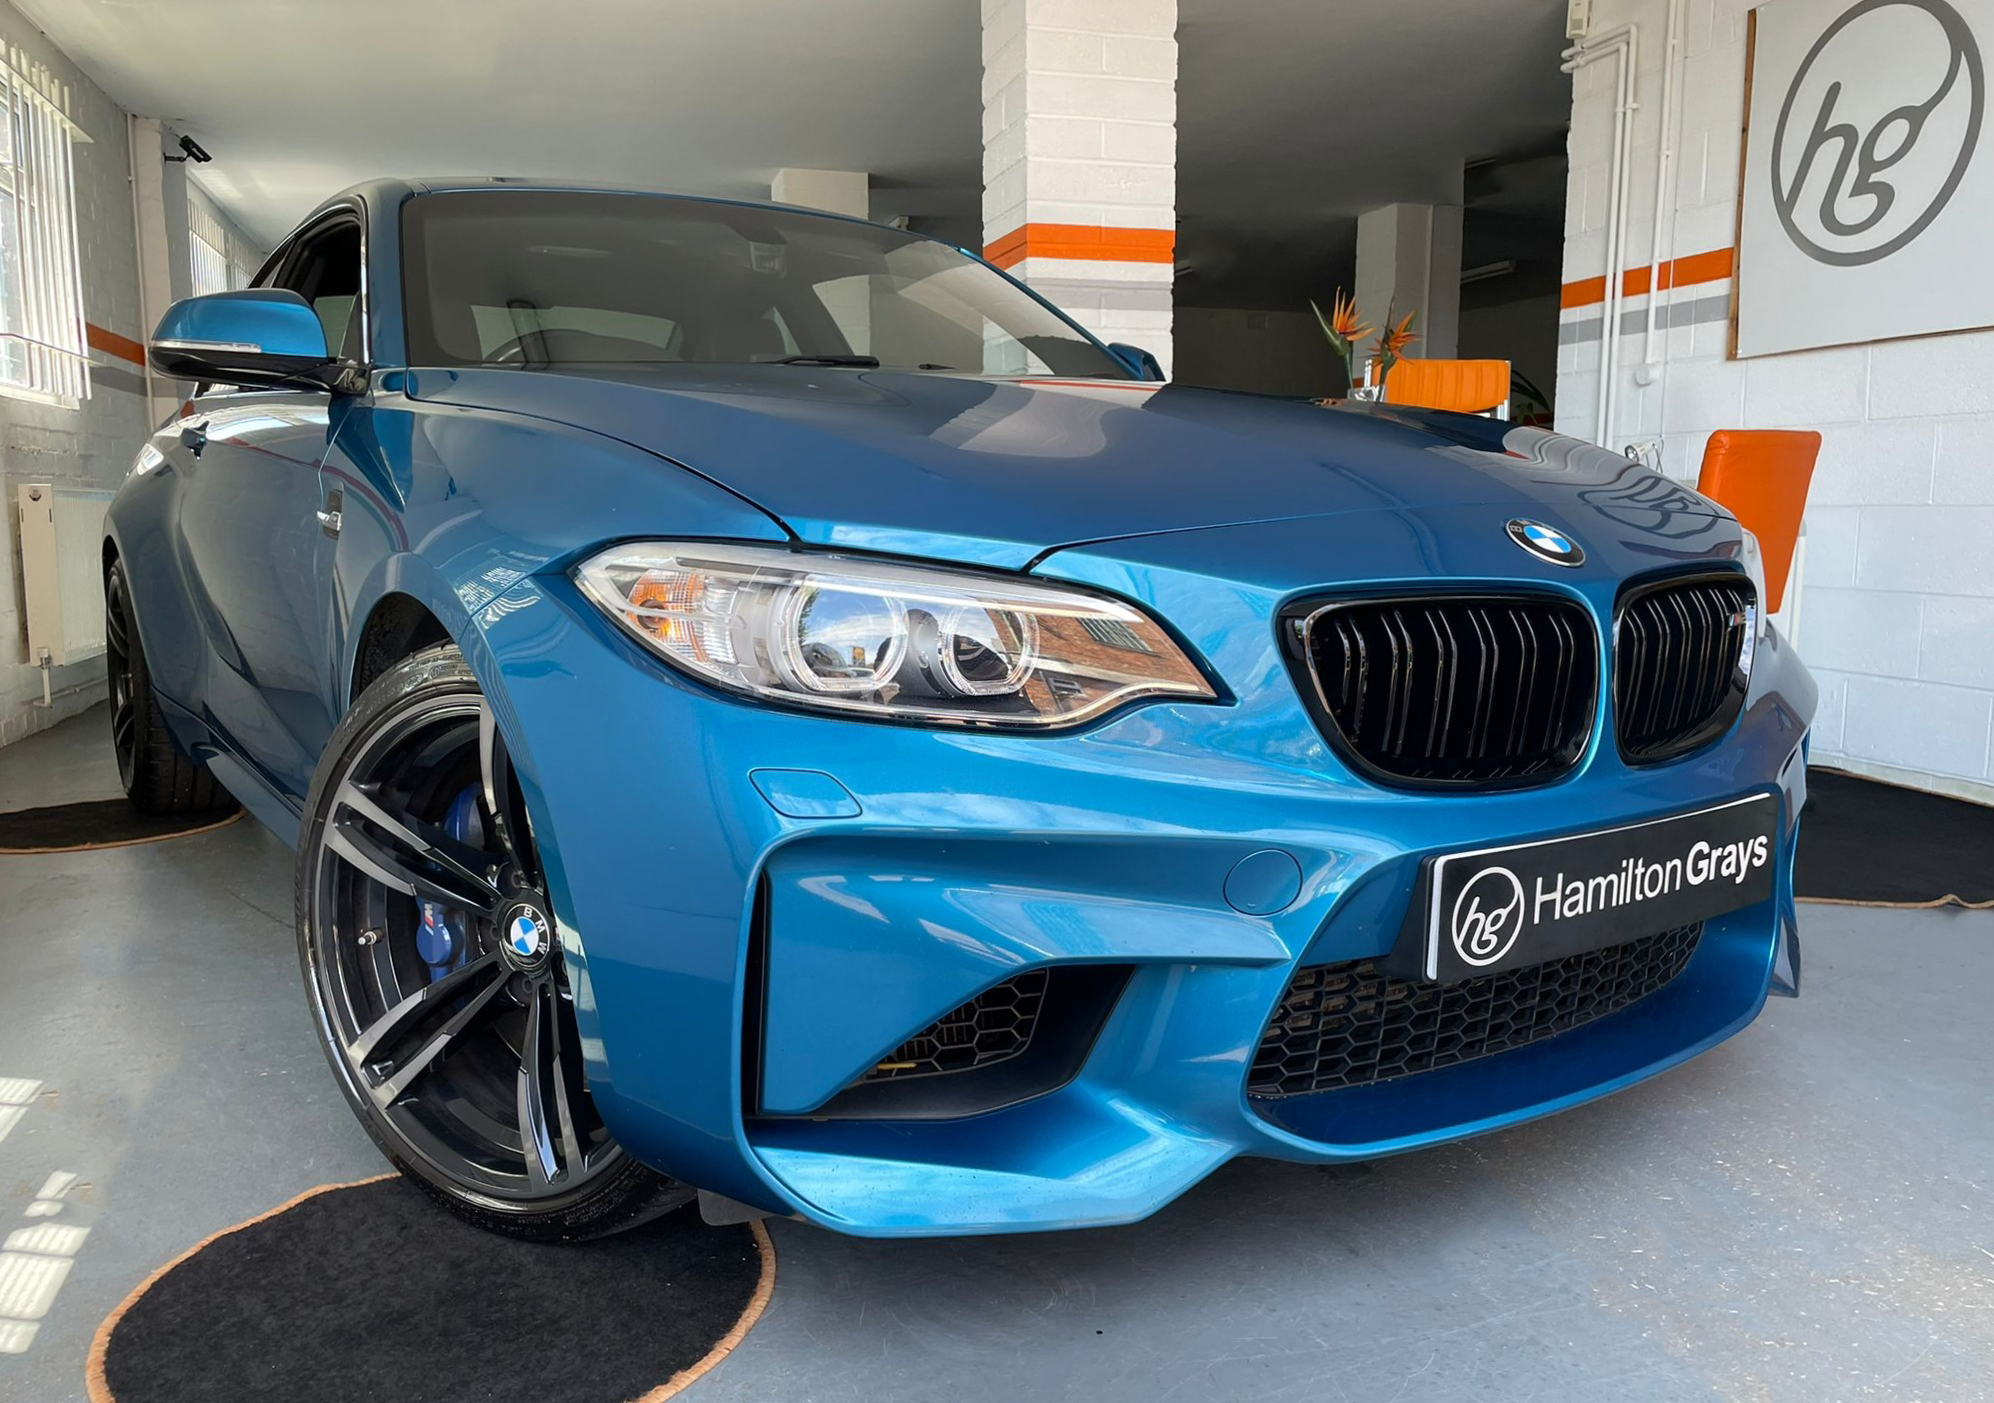 2017 (17) BMW M2 3.0i DCT Coupe. Finished in Long Beach Blue Metallic with Full Black Dakota Leather. 37k.. FBMWSH. Top Spec!. (SOLD)